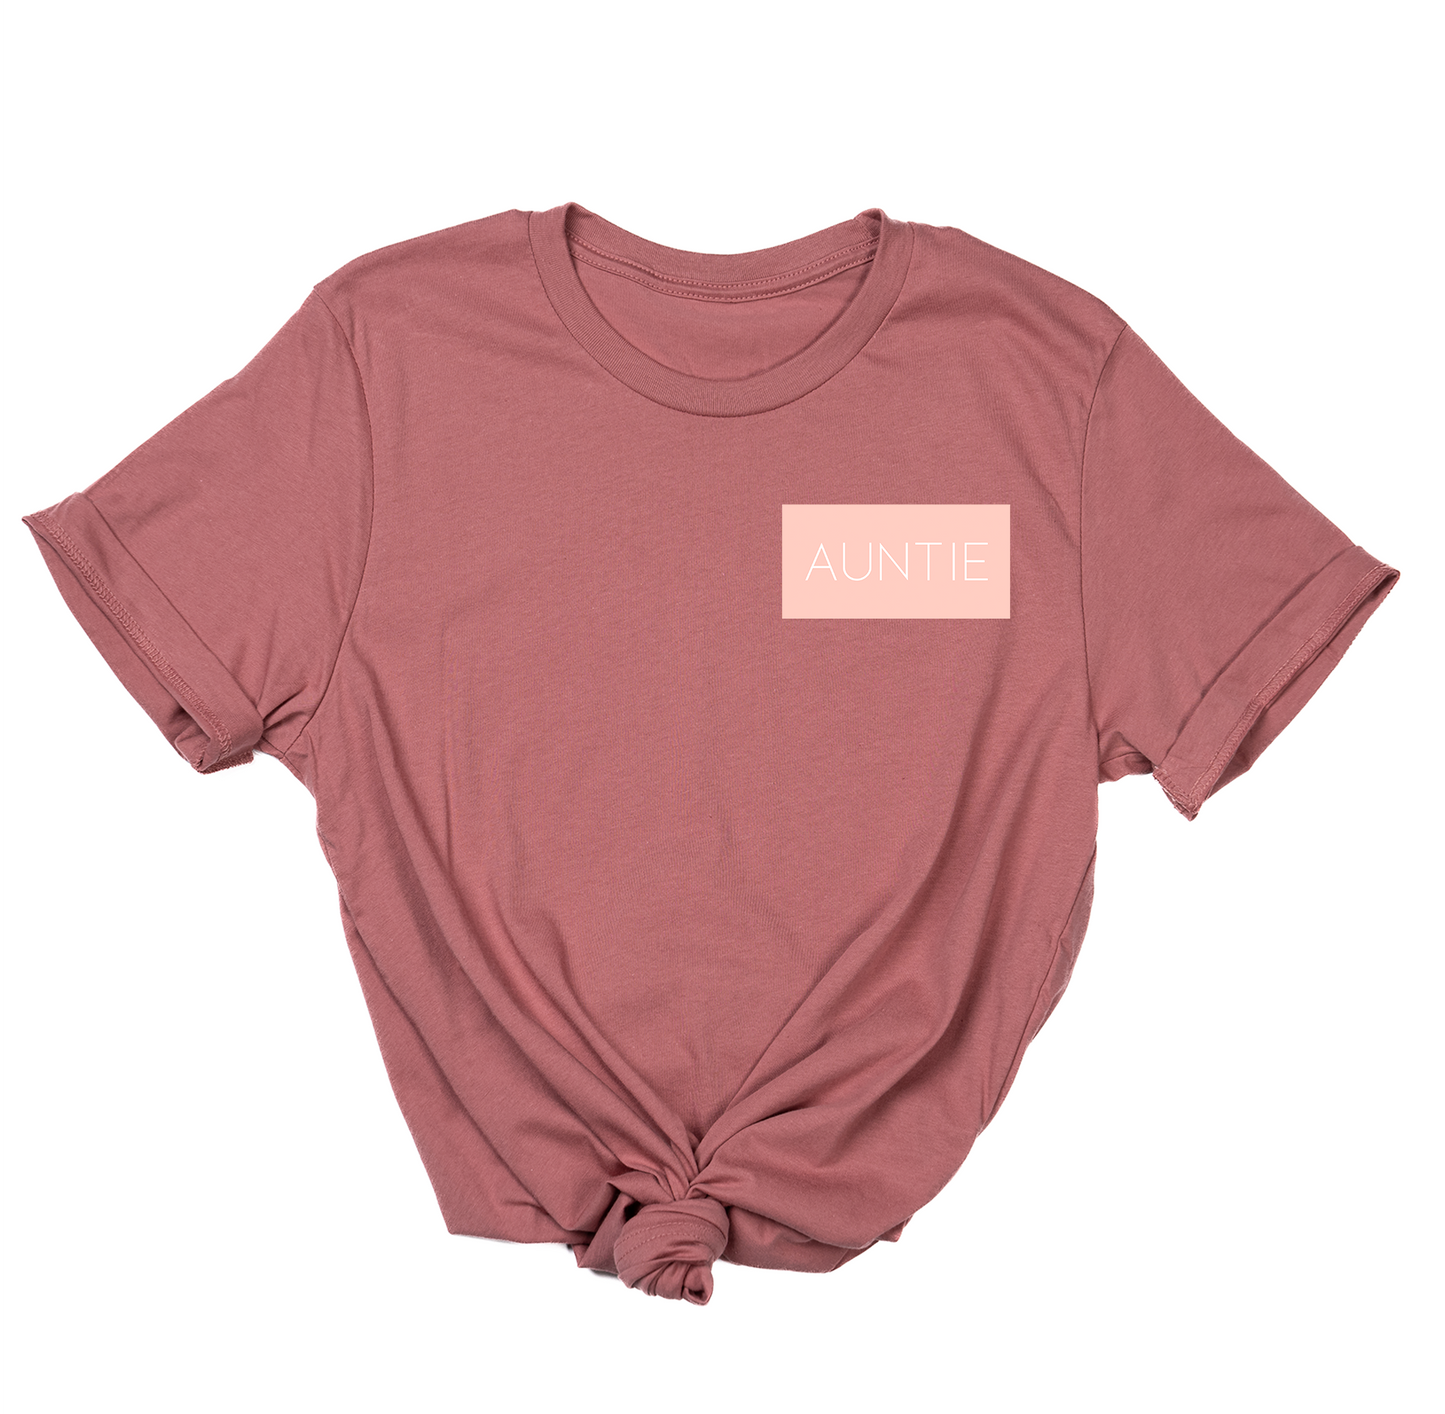 Auntie (Boxed Collection, Pocket, Ballerina Pink Box/White Text) - Tee (Mauve)